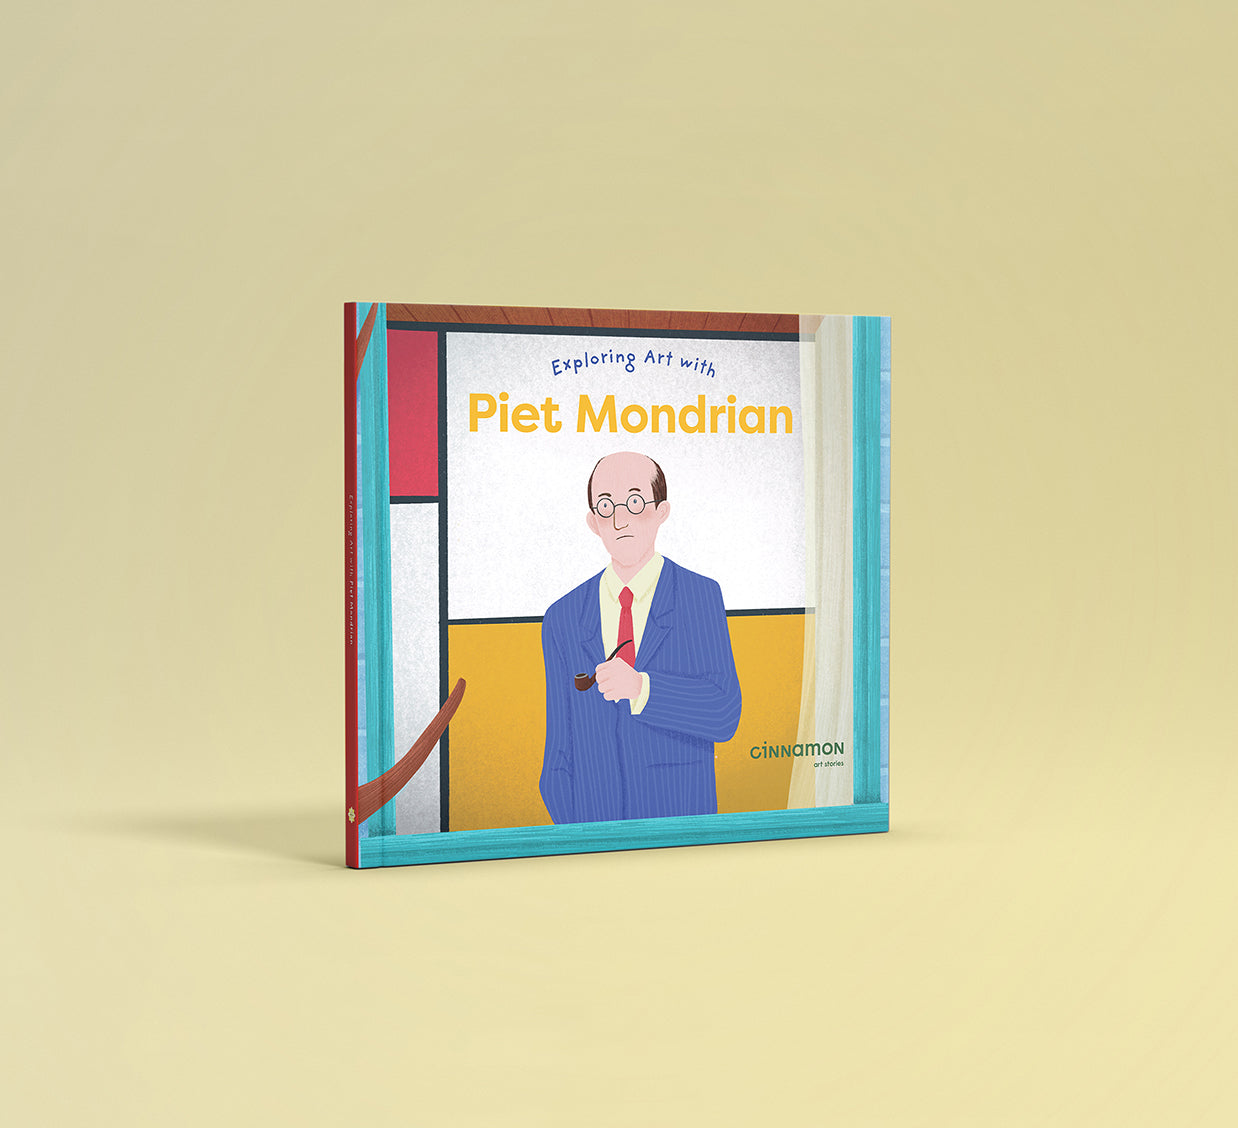 A fun and colorful read-aloud book on Dutch artist Piet Mondrian. Exploring Art with Piet Mondrian unearths the Dutch painter's vision to create a common language through art based on color theory, geometric shapes and flatness of forms.     Reading level: 5 to 8. Created for children under 12 years old.